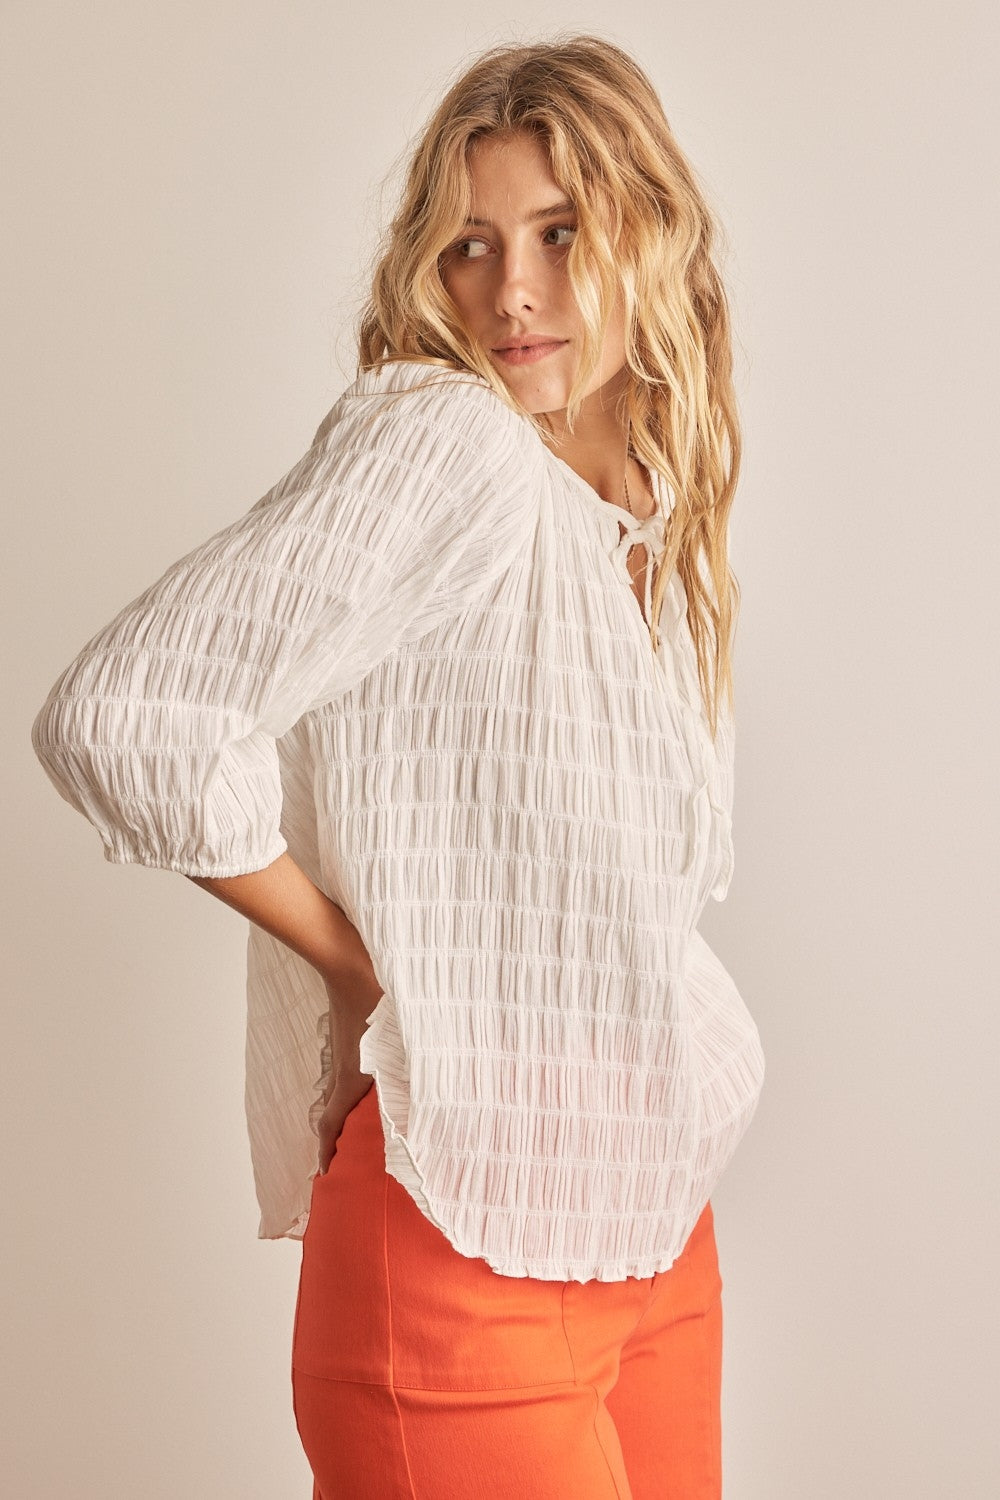 Textured Tie Neck Blouse by InFebruary